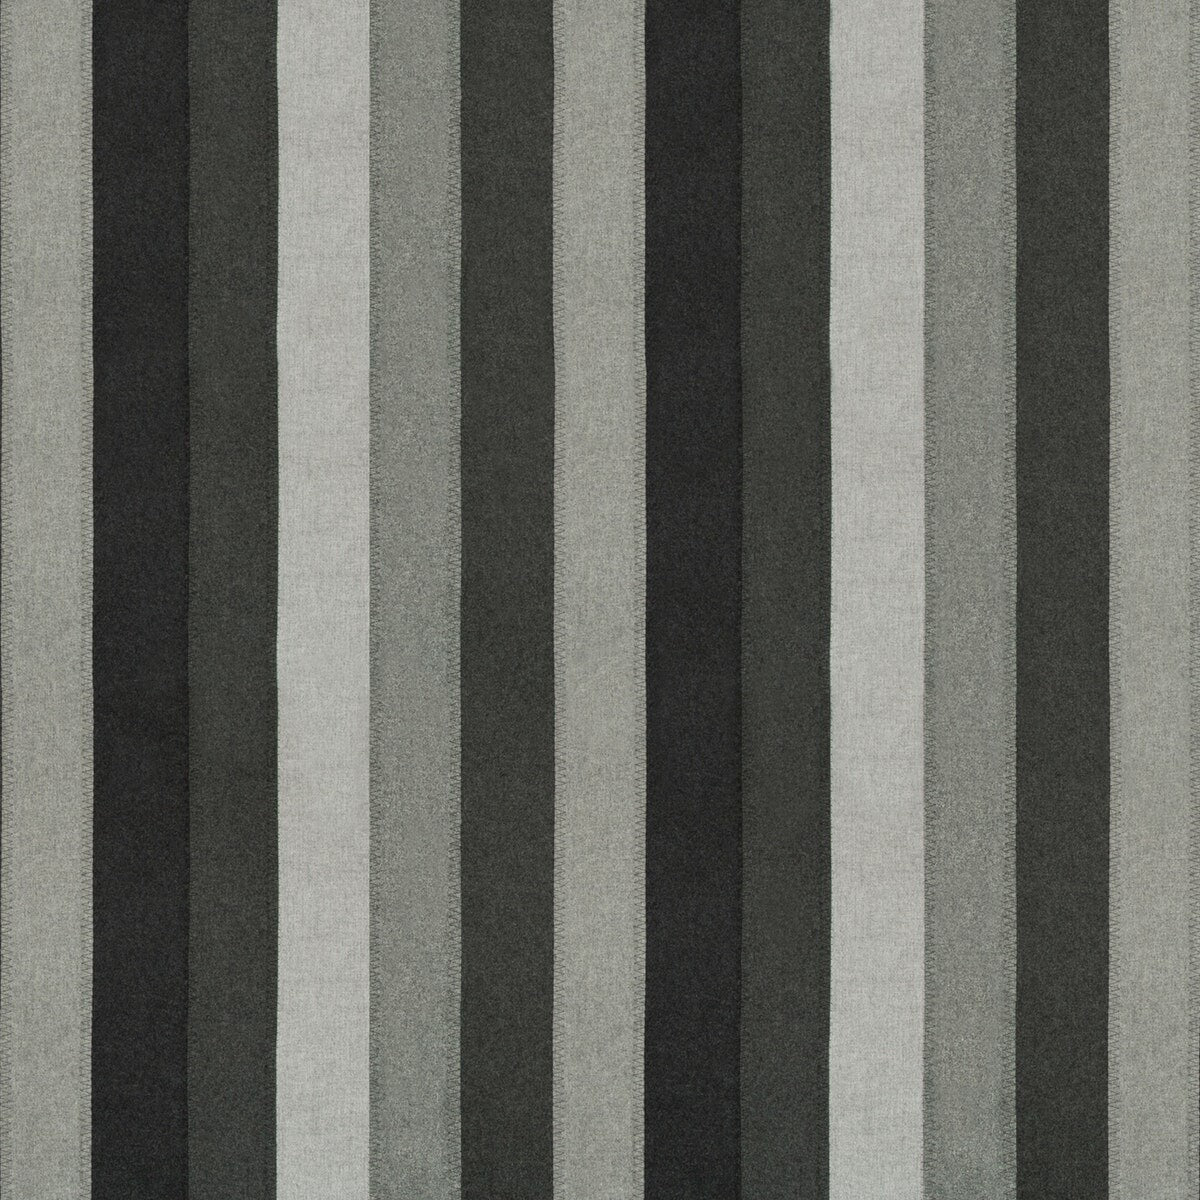 New Suit fabric in charcoal color - pattern 34913.811.0 - by Kravet Couture in the Modern Tailor collection